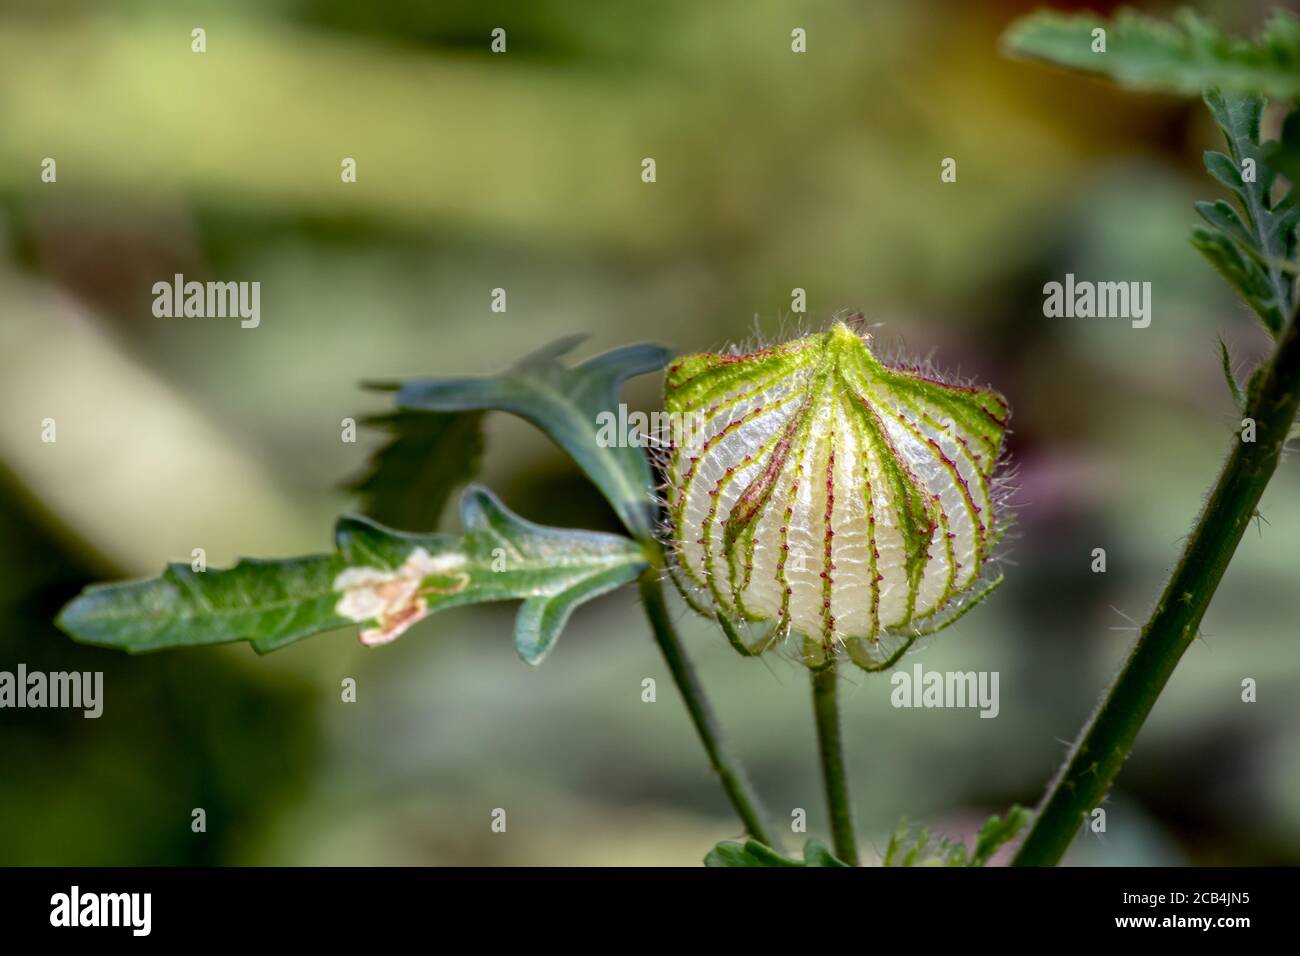 The seedpod of a Flower of an Hour found in Missouri with a defocused background. Its white flowers will bloom for only a few hours before wilting. It Stock Photo